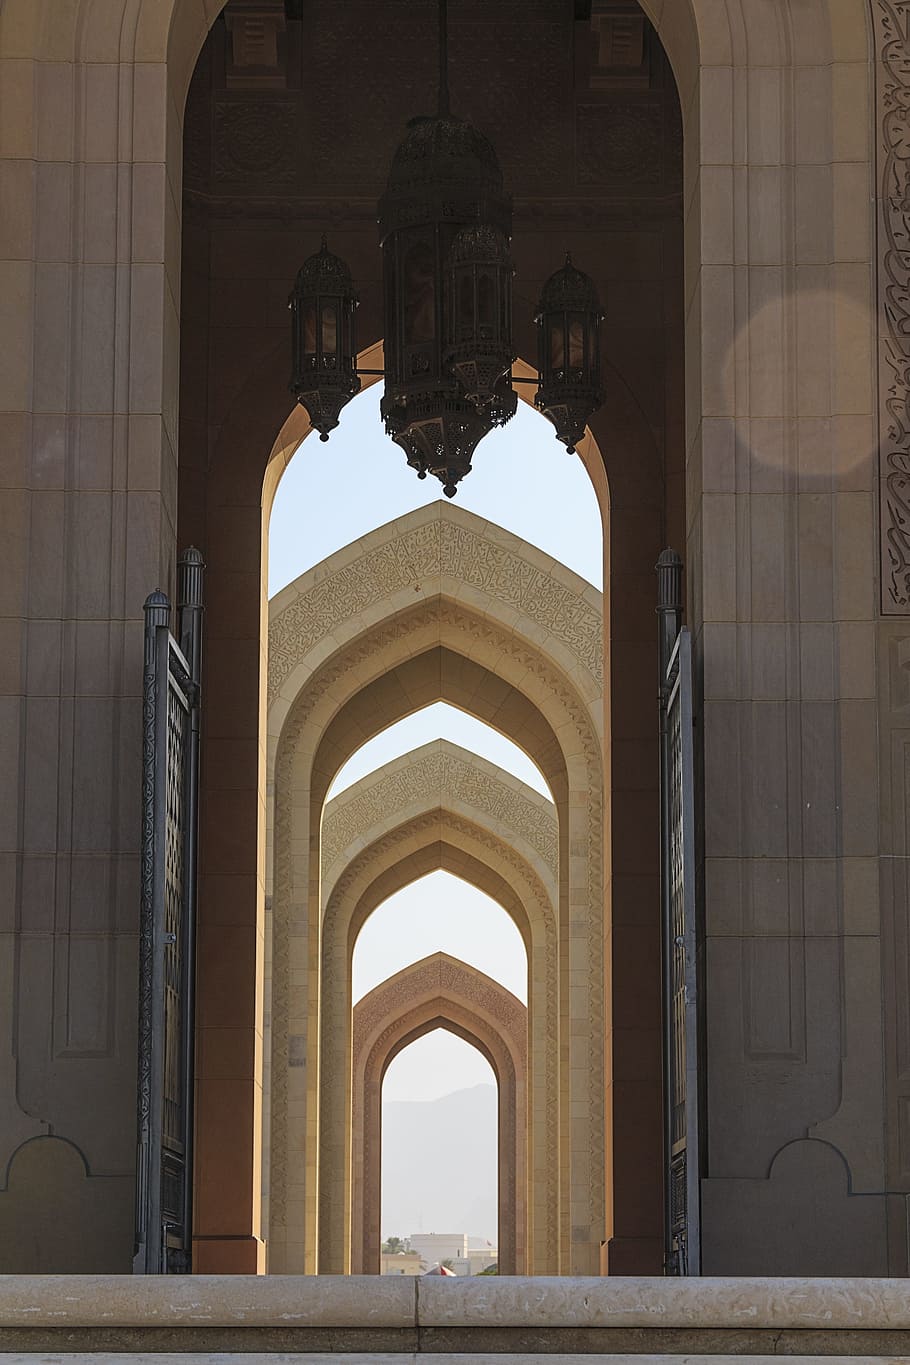 sultan qaboos grand mosque, oman, architecture, religious, arabic, arch, built structure, building exterior, history, the past